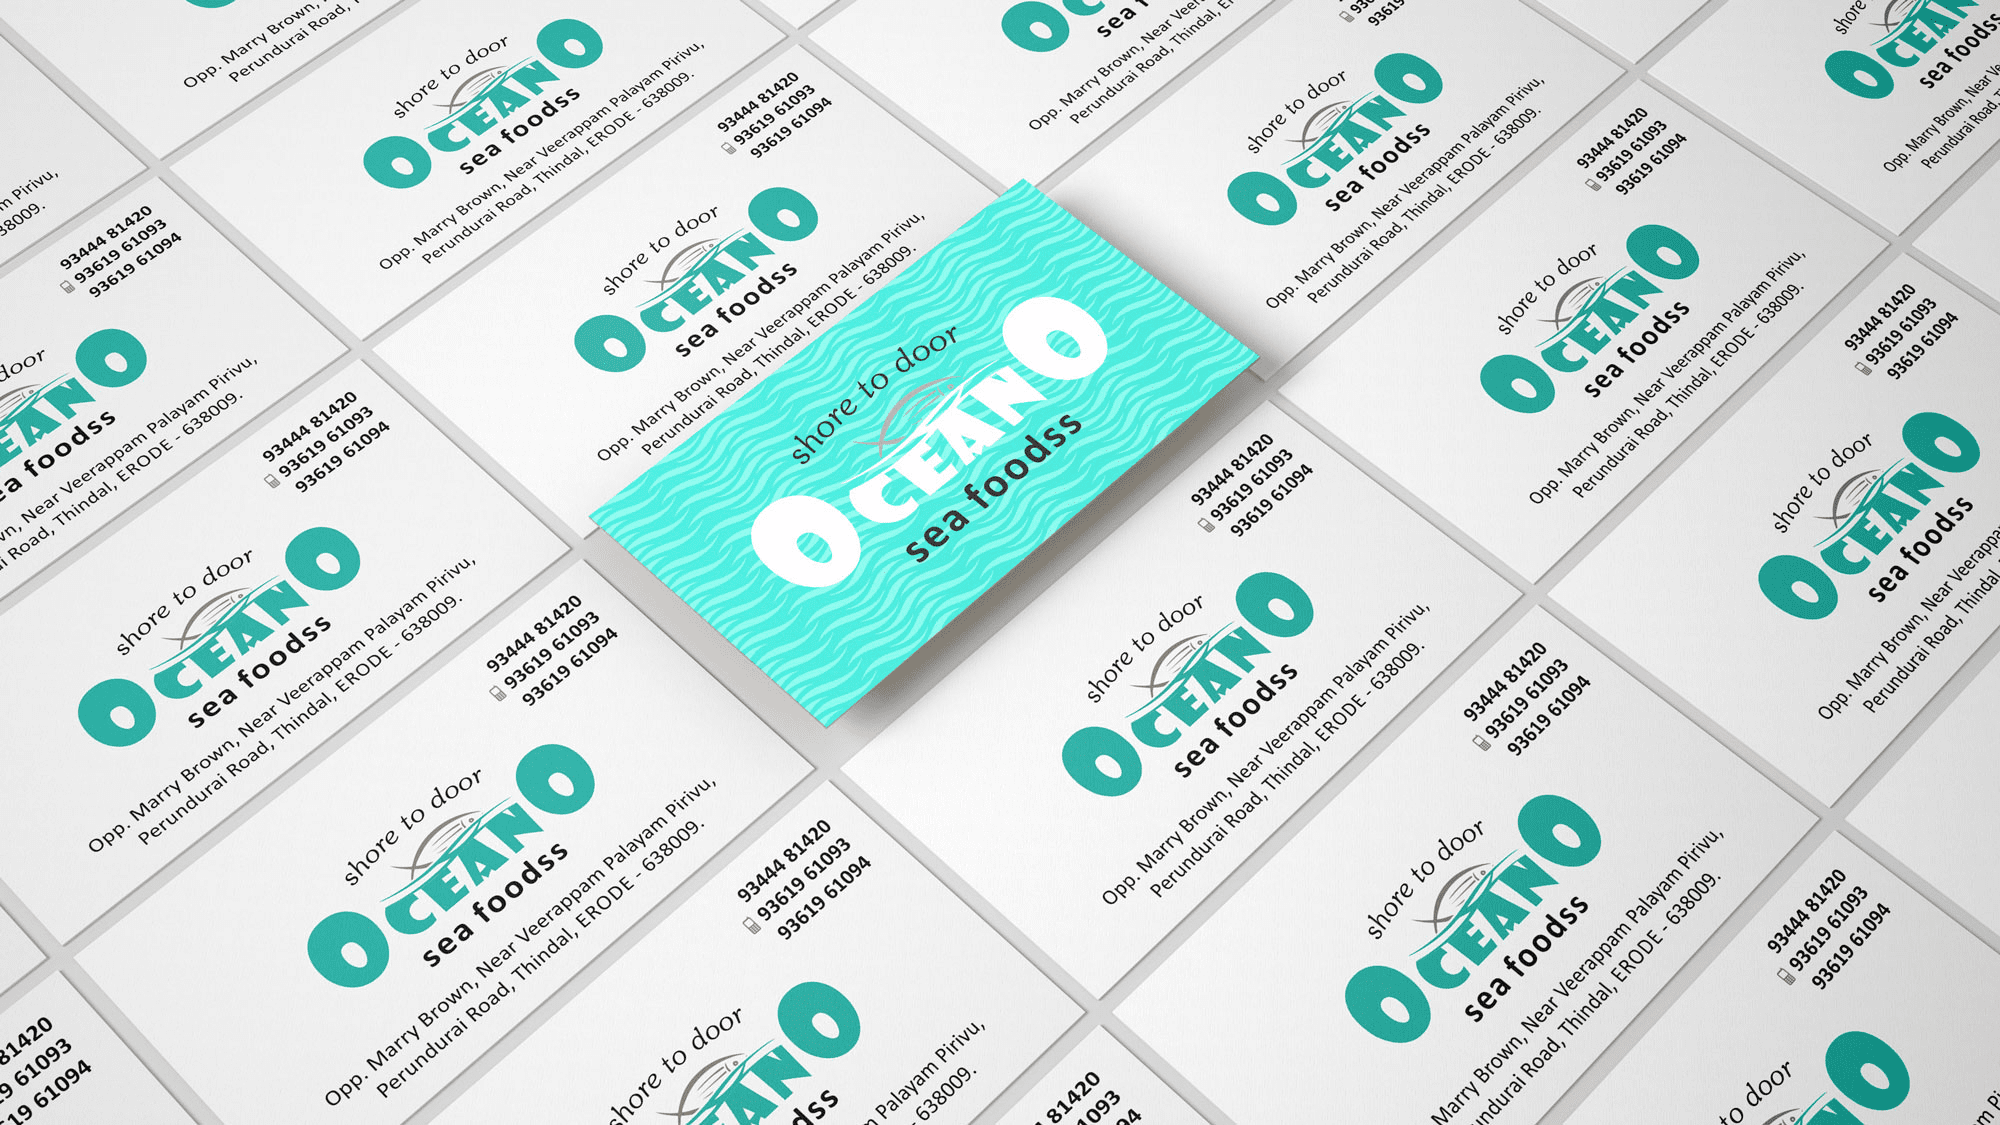 Oceano Sea Foods Visiting Card Graphic Design, Branding Packaging Design in Chennai by Creative Prints thecreativeprints